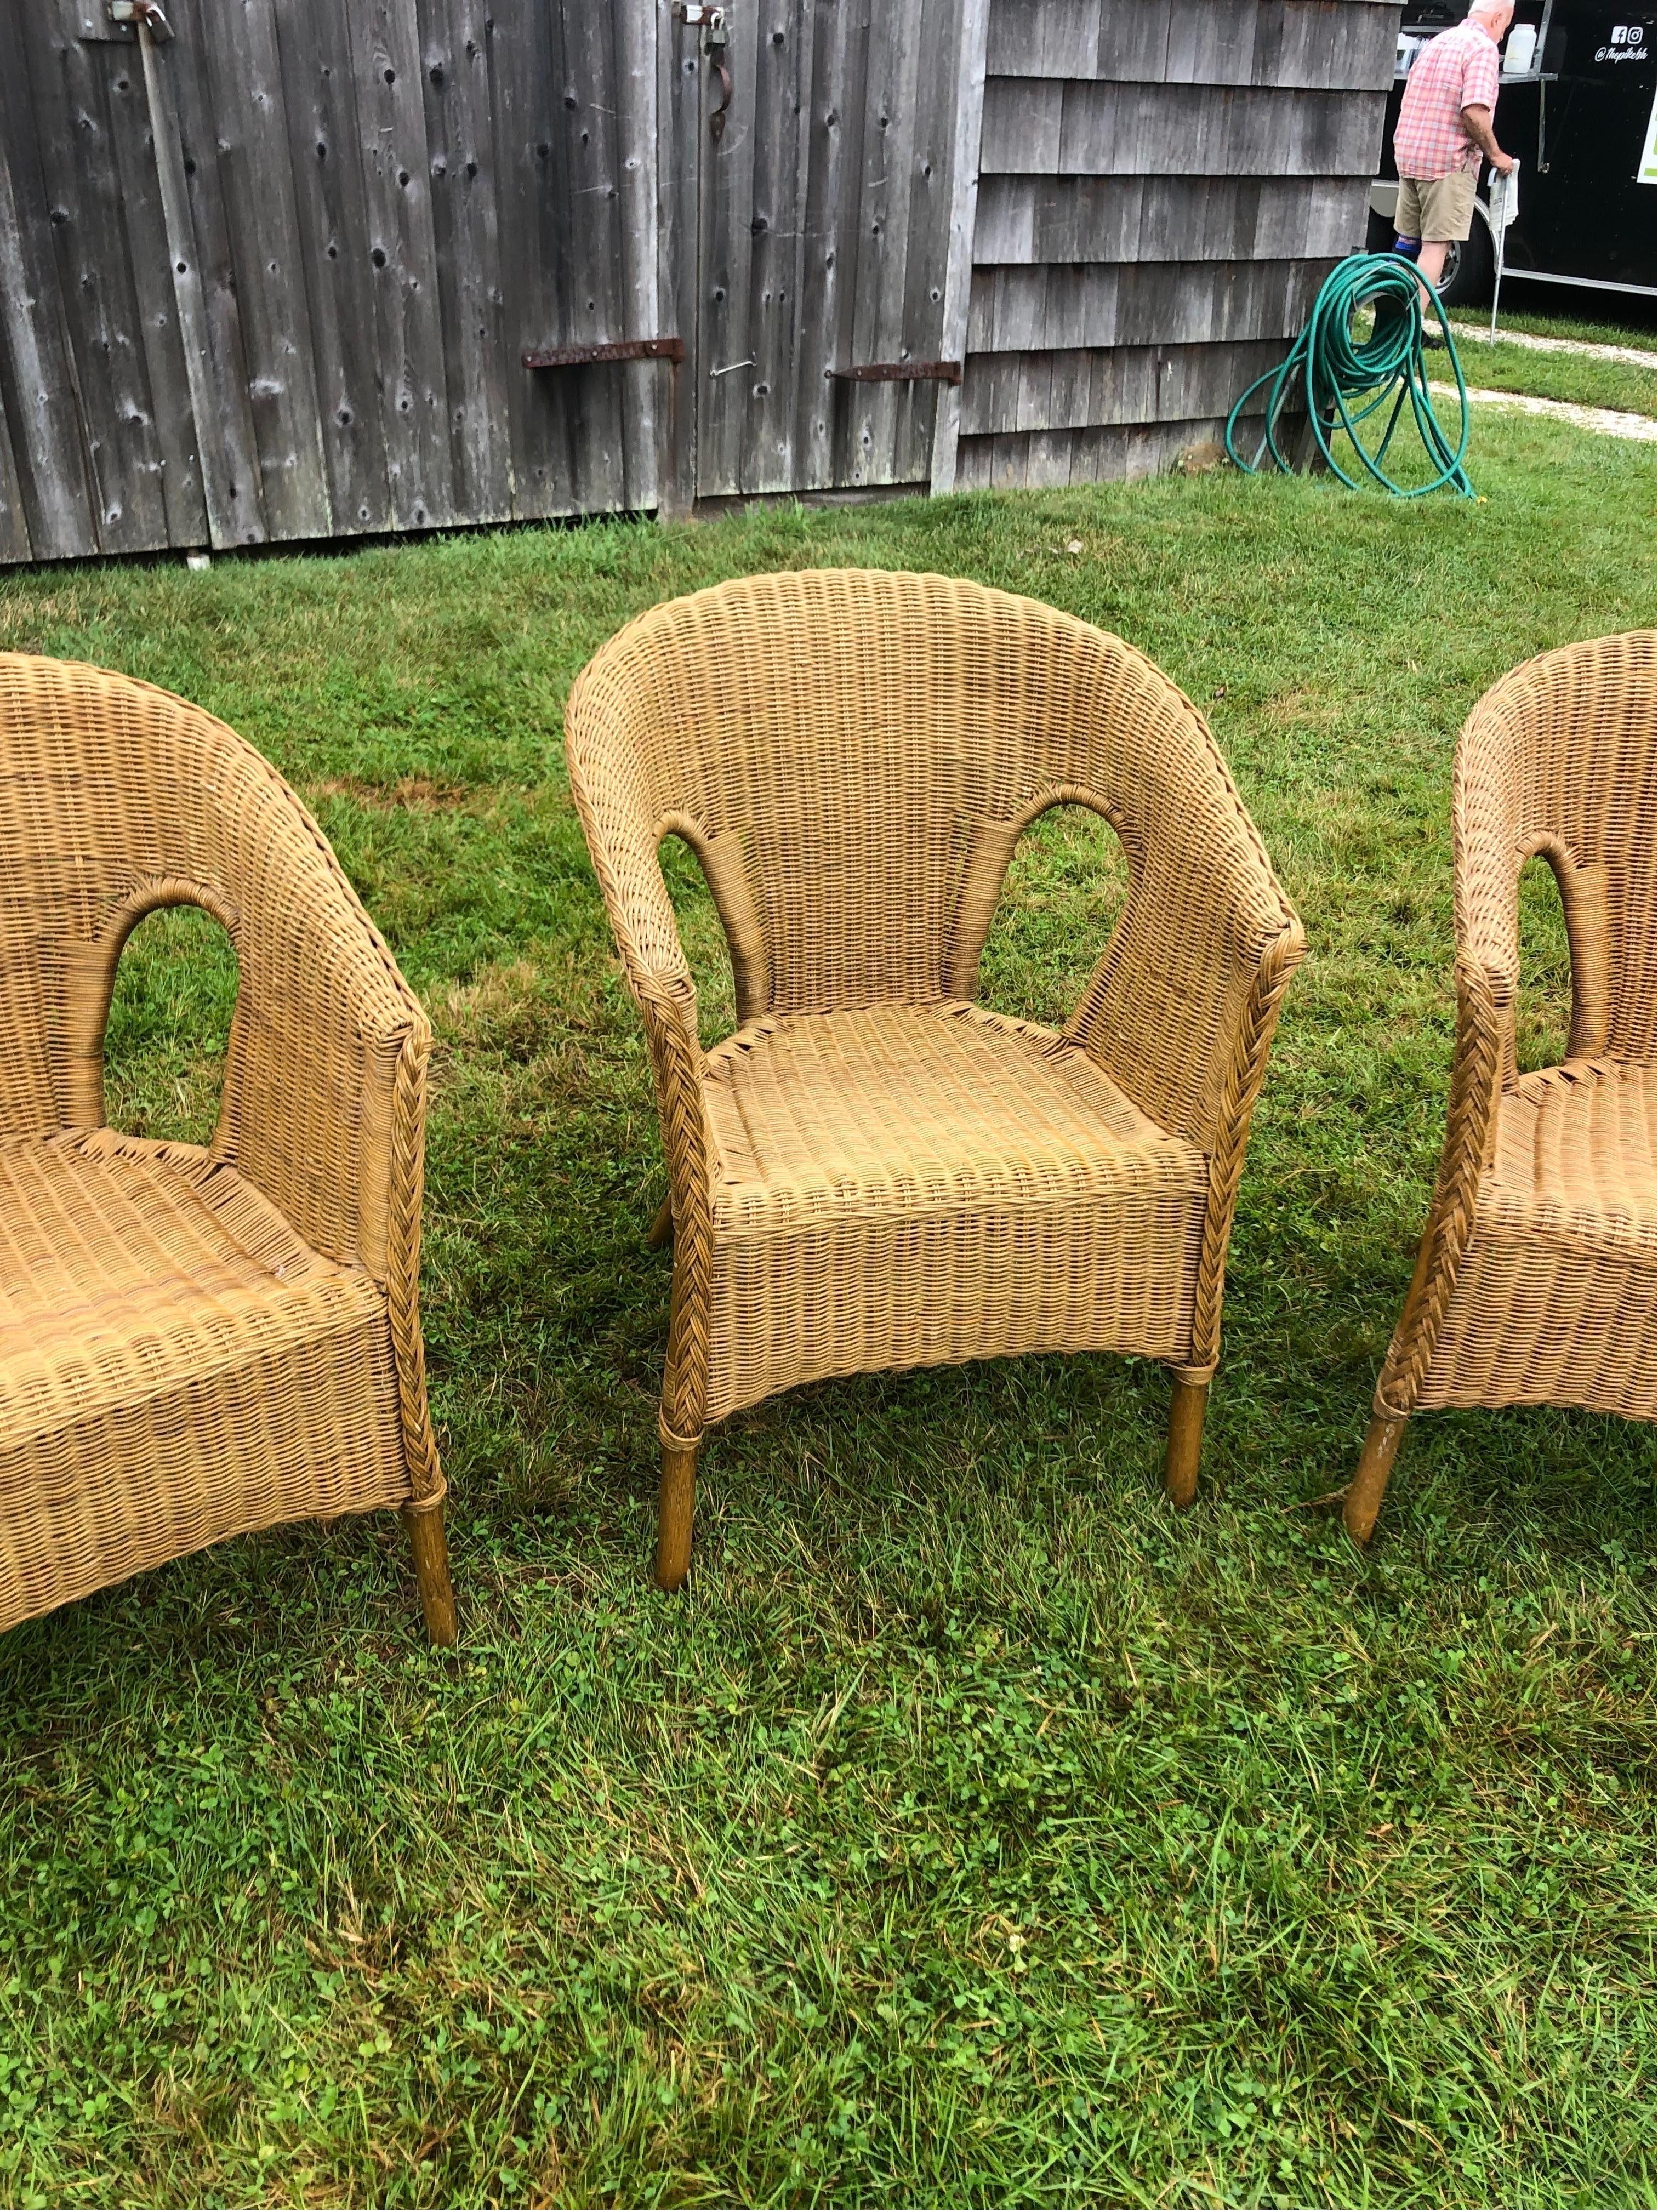 Set of Four Vintage Woven Wicker Chairs. A nice compact design making them  an ideal complement for any setting. Vintage wicker chairs can add charm and character to various interior or covered outdoor spaces. These chairs are quite